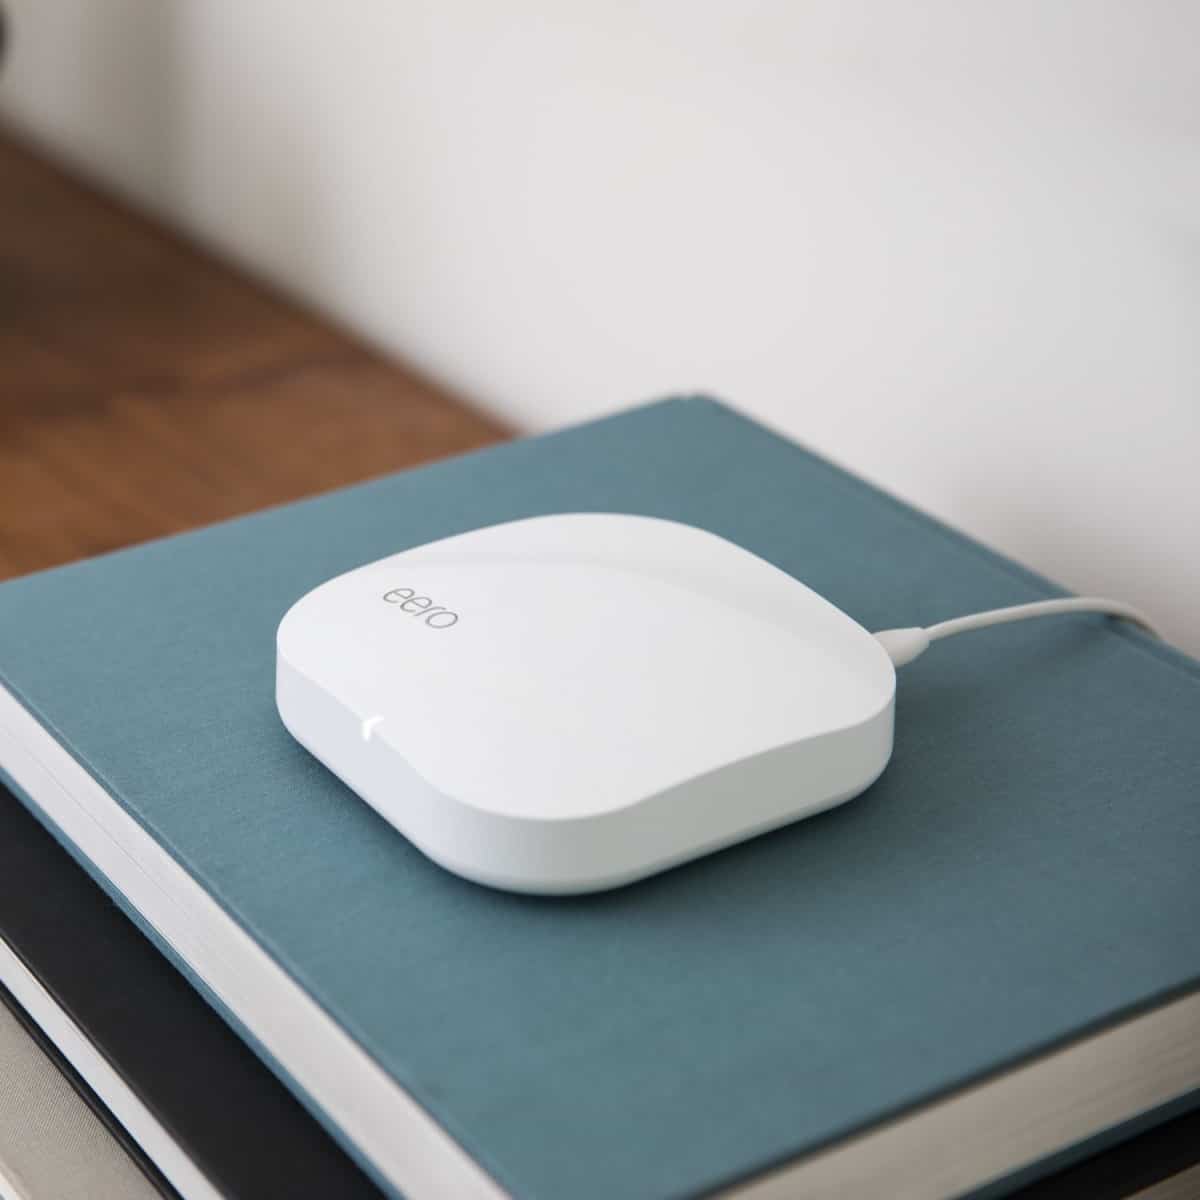 Eero Home Wi-Fi System | Must-Have Wireless Tech Gadgets That Will Make Your Life Easier | Wireless Technology